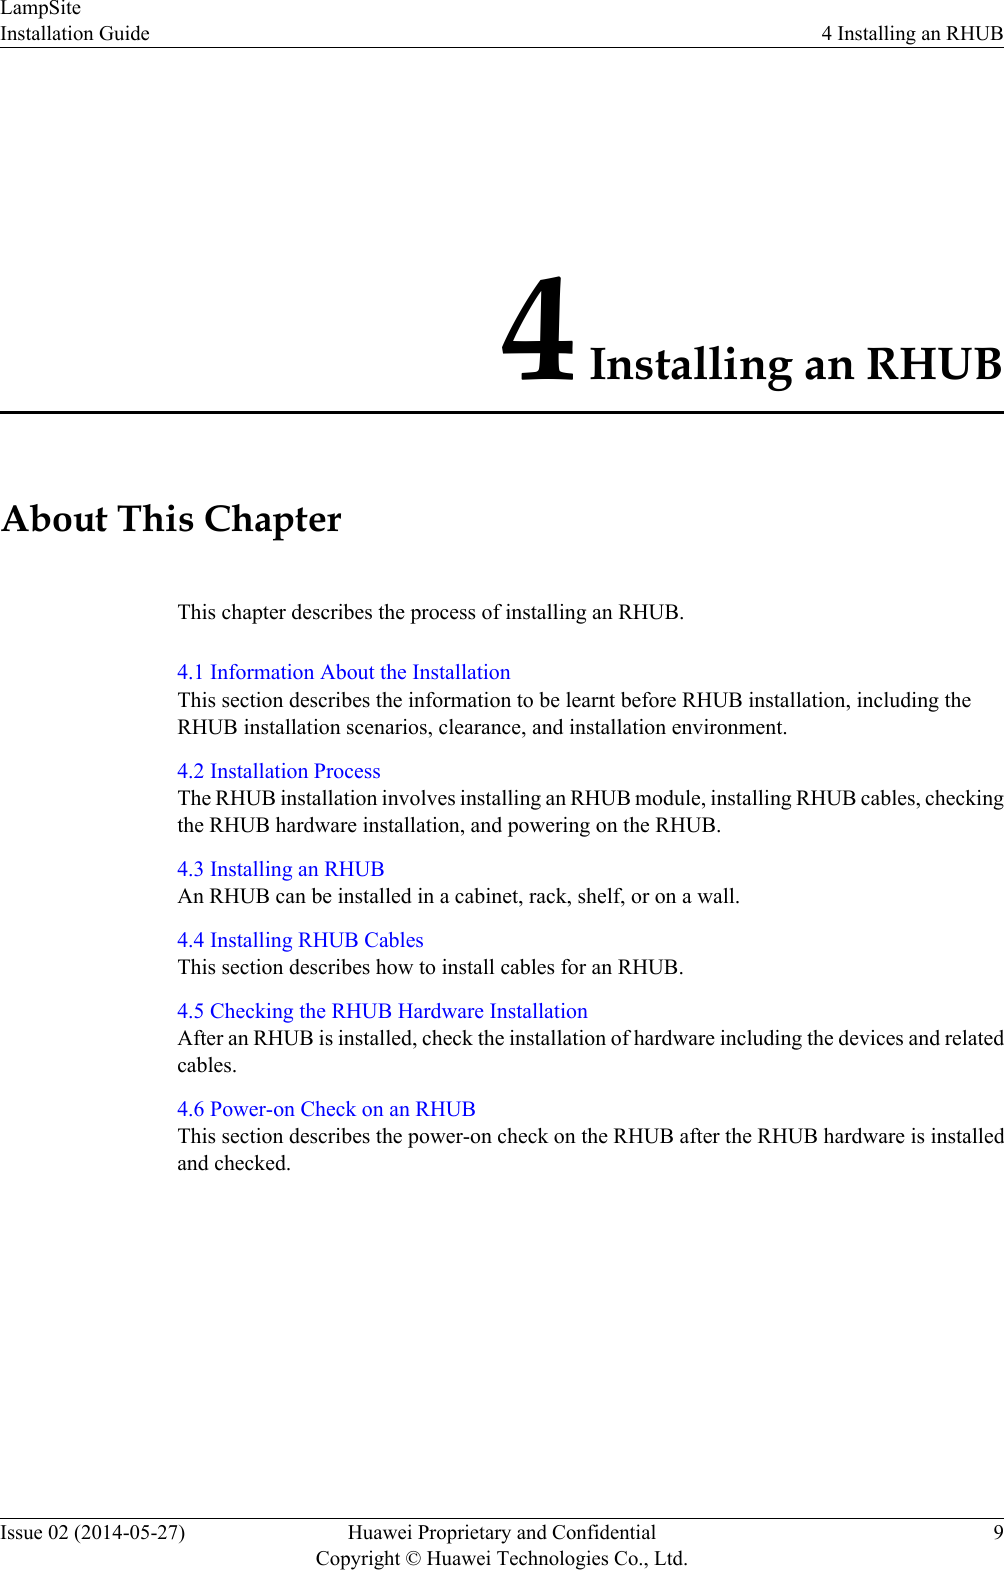 4 Installing an RHUBAbout This ChapterThis chapter describes the process of installing an RHUB.4.1 Information About the InstallationThis section describes the information to be learnt before RHUB installation, including theRHUB installation scenarios, clearance, and installation environment.4.2 Installation ProcessThe RHUB installation involves installing an RHUB module, installing RHUB cables, checkingthe RHUB hardware installation, and powering on the RHUB.4.3 Installing an RHUBAn RHUB can be installed in a cabinet, rack, shelf, or on a wall.4.4 Installing RHUB CablesThis section describes how to install cables for an RHUB.4.5 Checking the RHUB Hardware InstallationAfter an RHUB is installed, check the installation of hardware including the devices and relatedcables.4.6 Power-on Check on an RHUBThis section describes the power-on check on the RHUB after the RHUB hardware is installedand checked.LampSiteInstallation Guide 4 Installing an RHUBIssue 02 (2014-05-27) Huawei Proprietary and ConfidentialCopyright © Huawei Technologies Co., Ltd.9